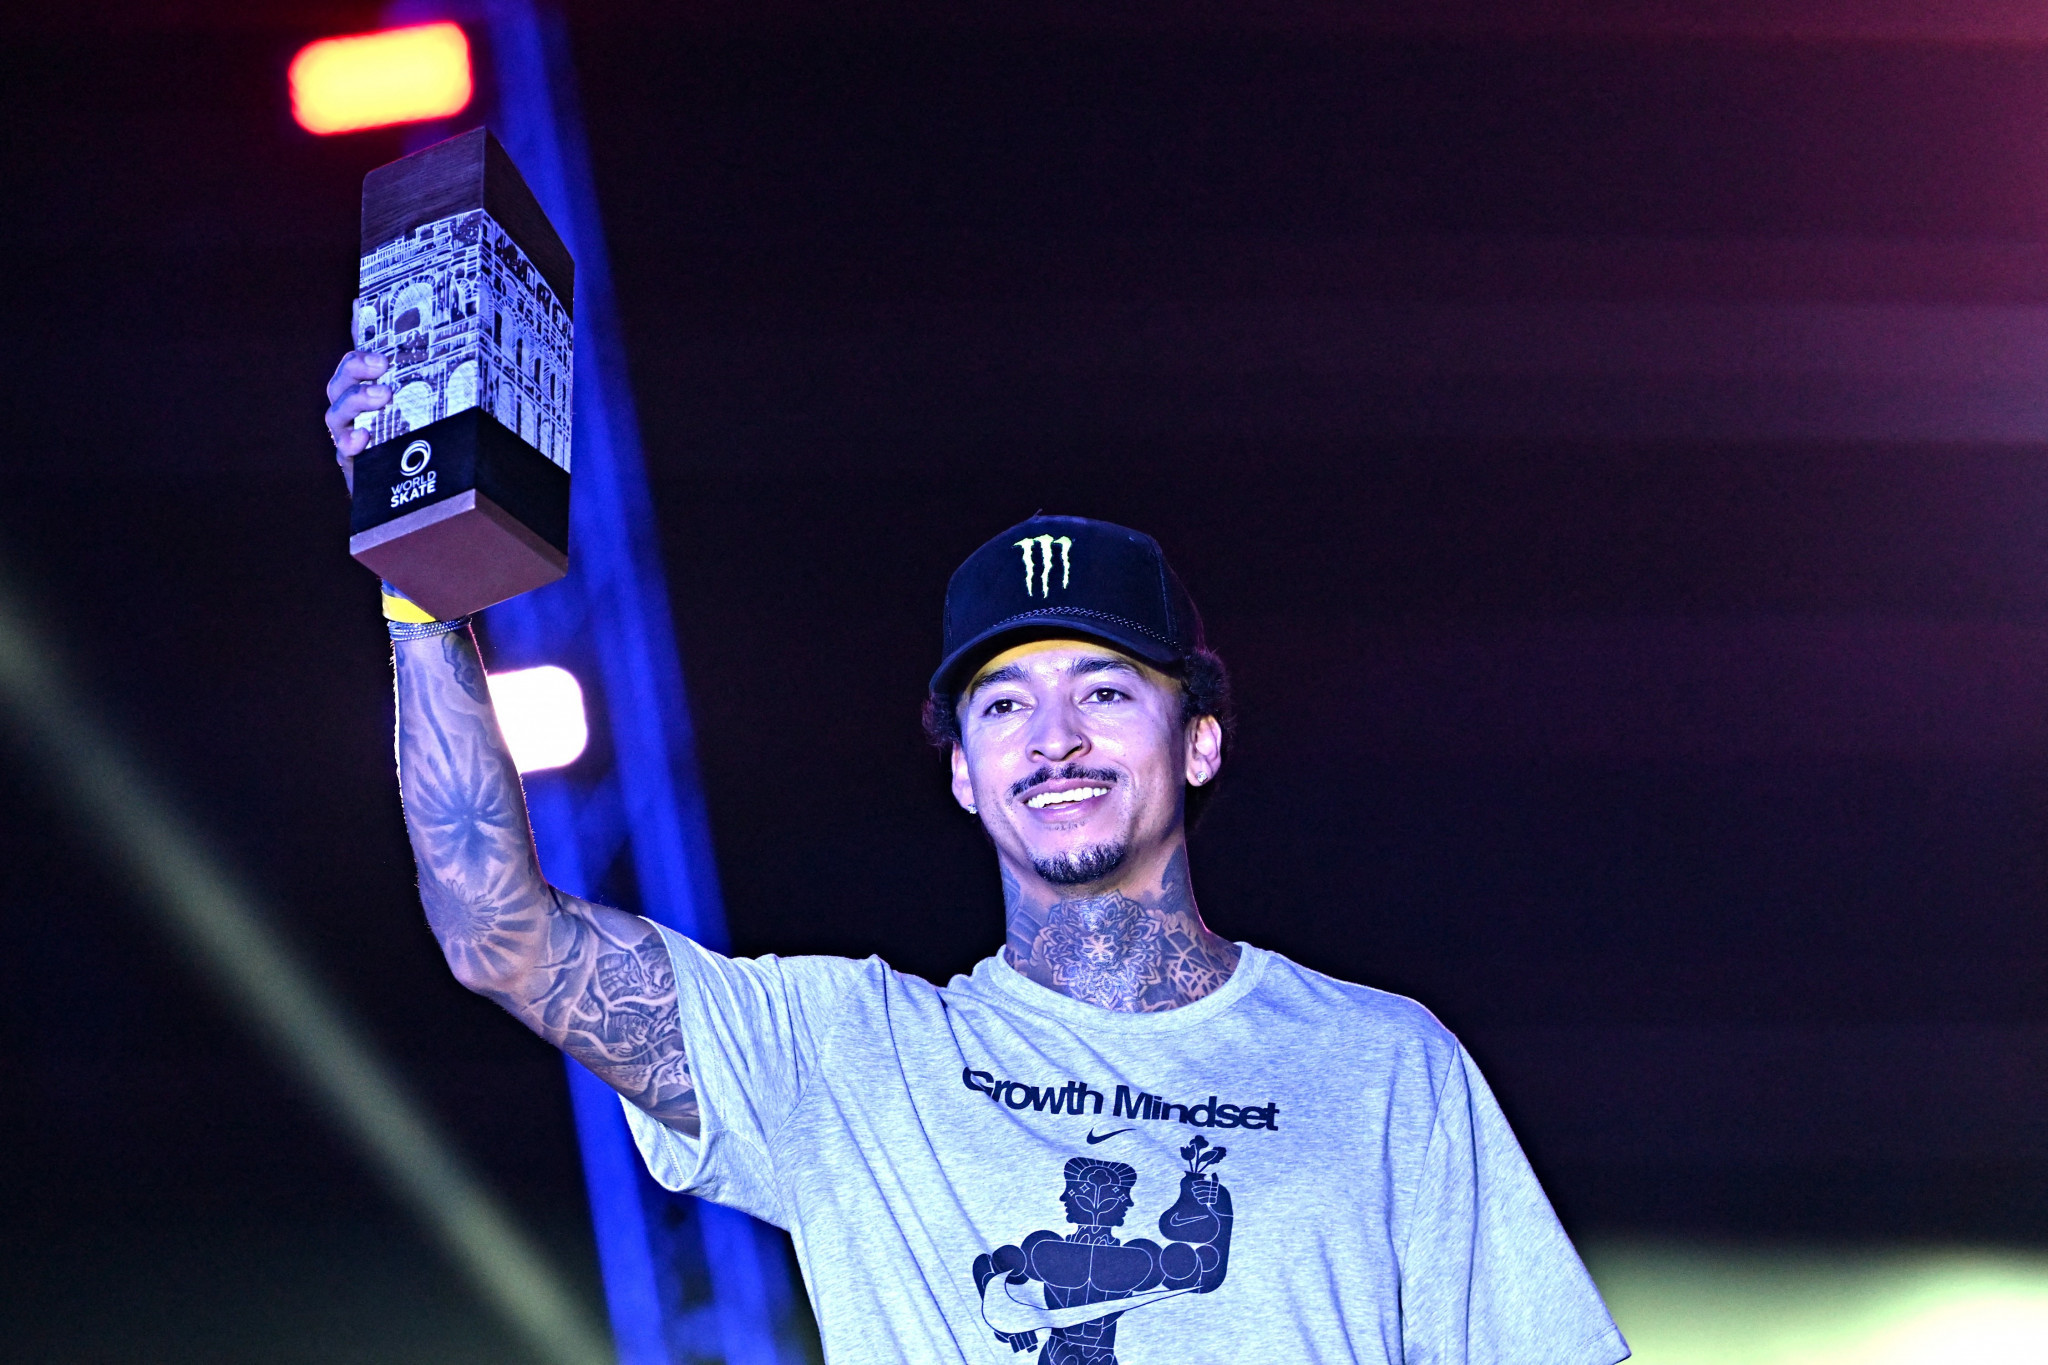 Nyjah Huston claimed victory in the men's competition ©Getty Images